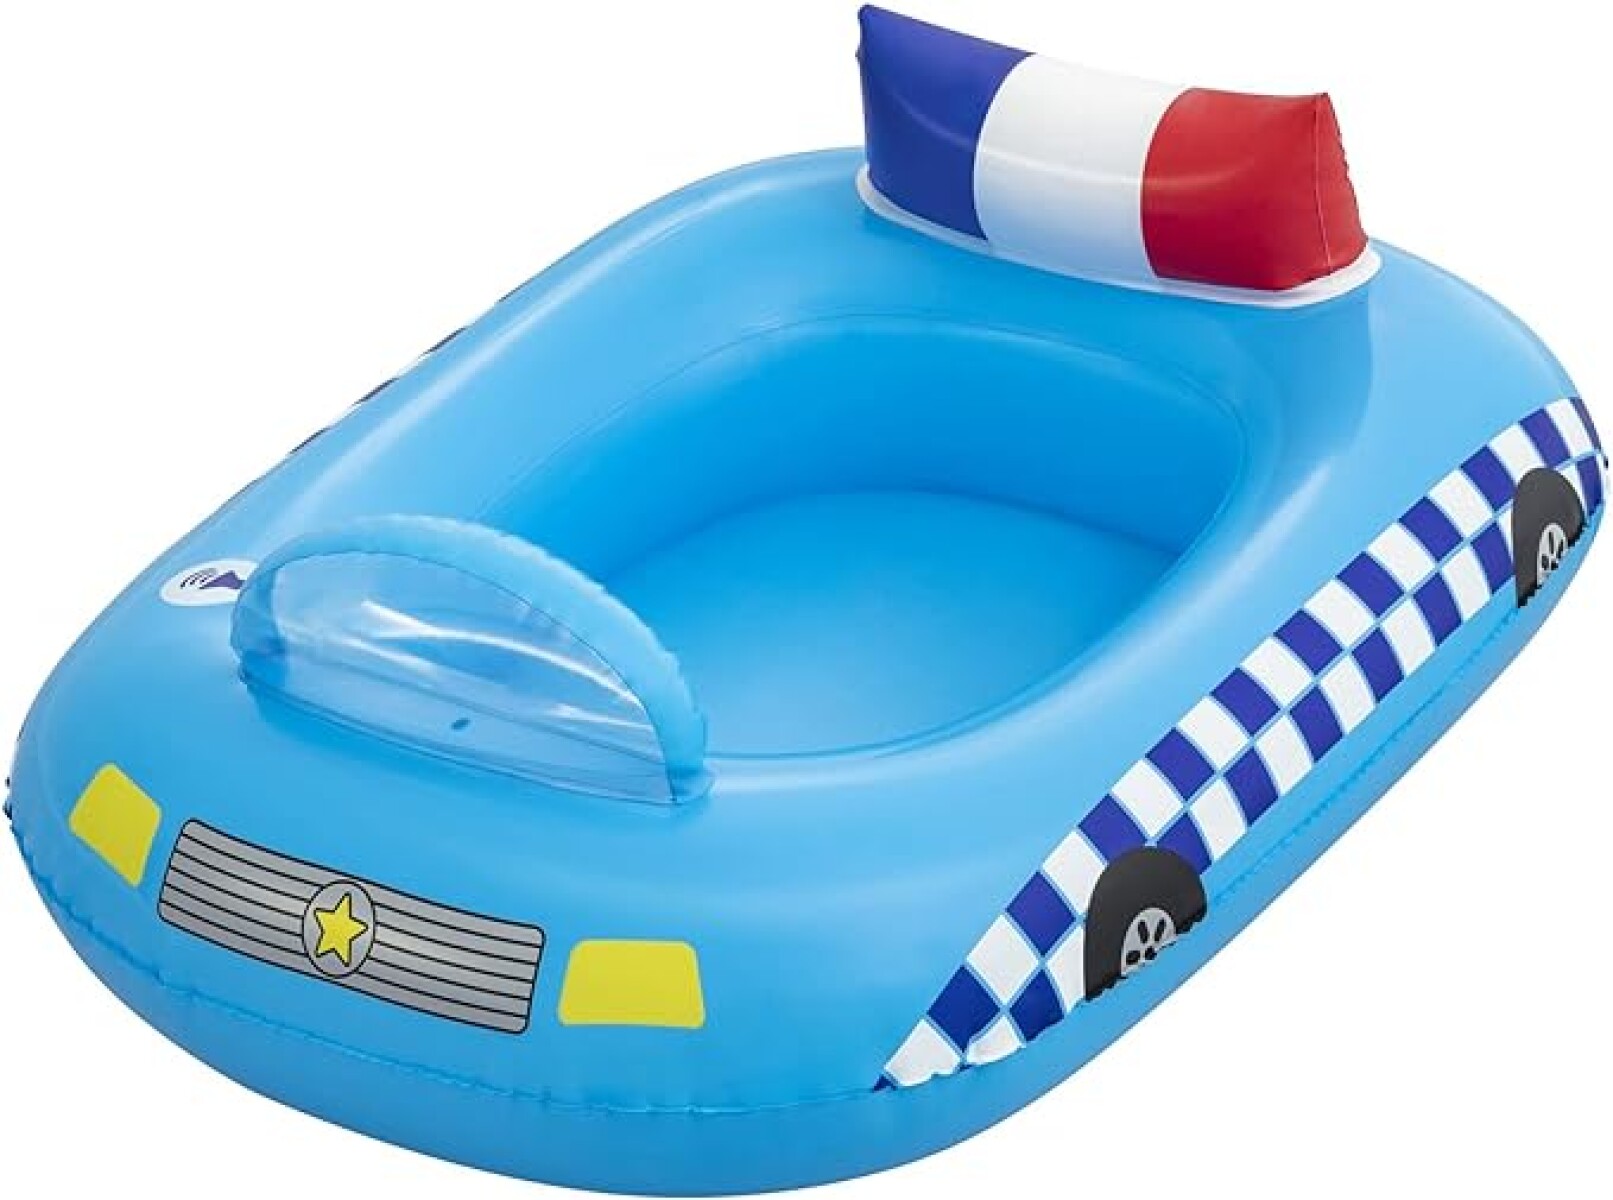 BOTE INFLABLE AUTO POLICIA BESTWAY 